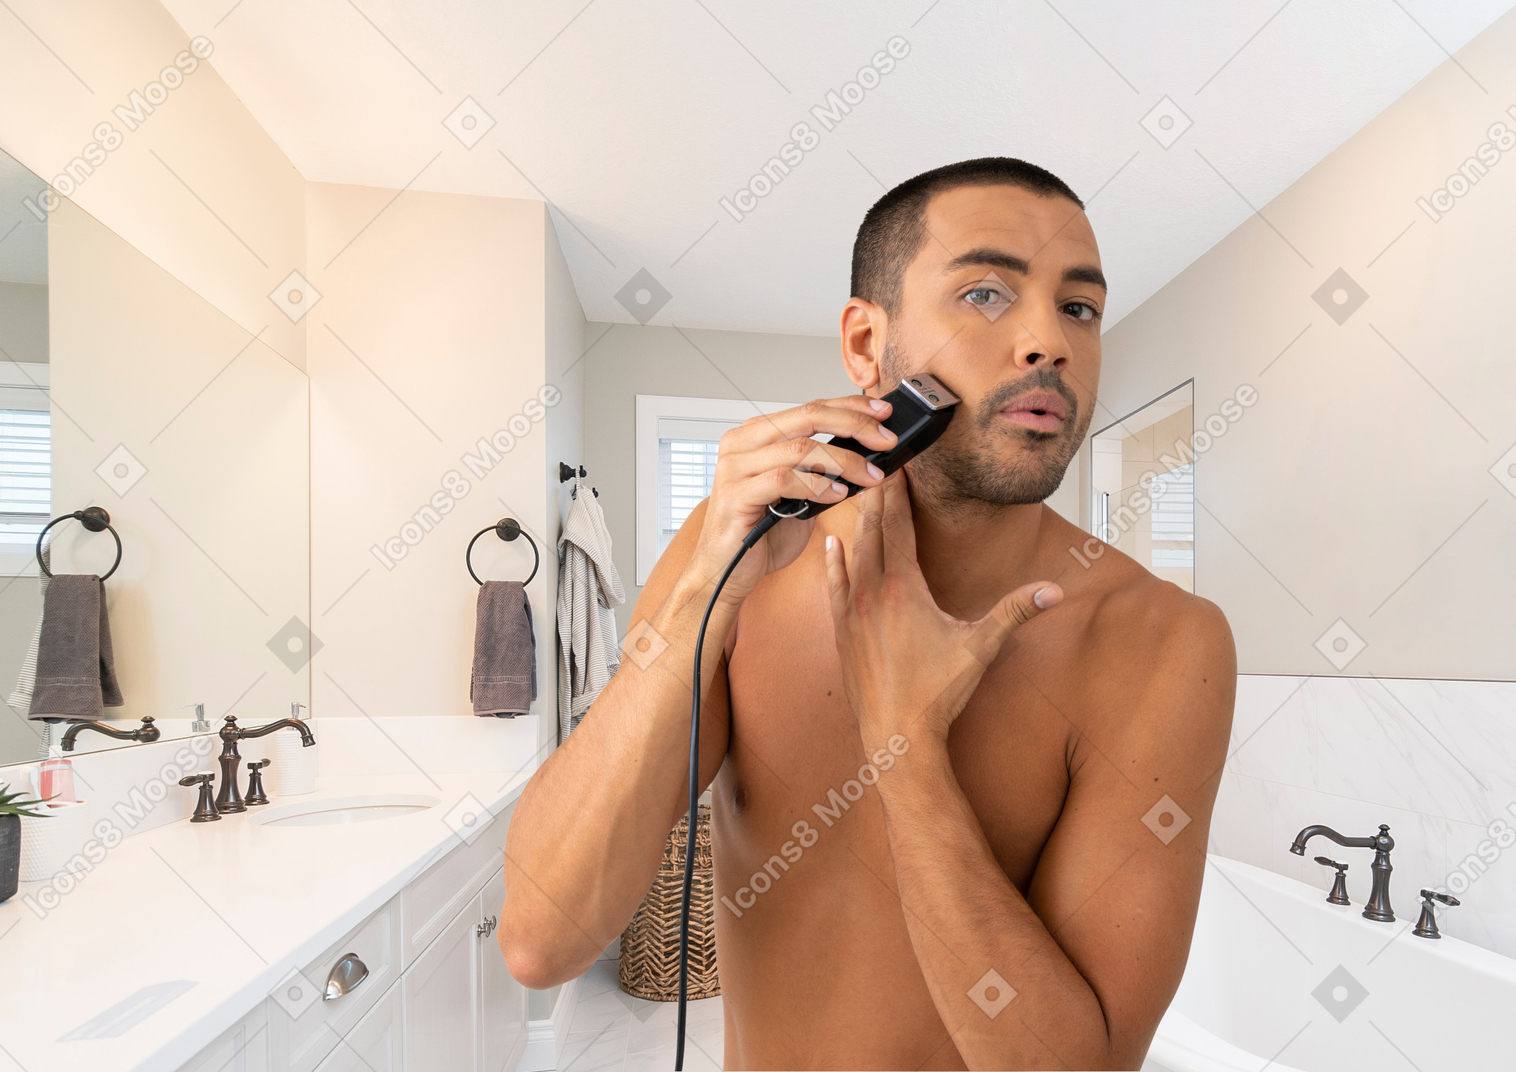 A man shaving in a bathroom with an electric razor